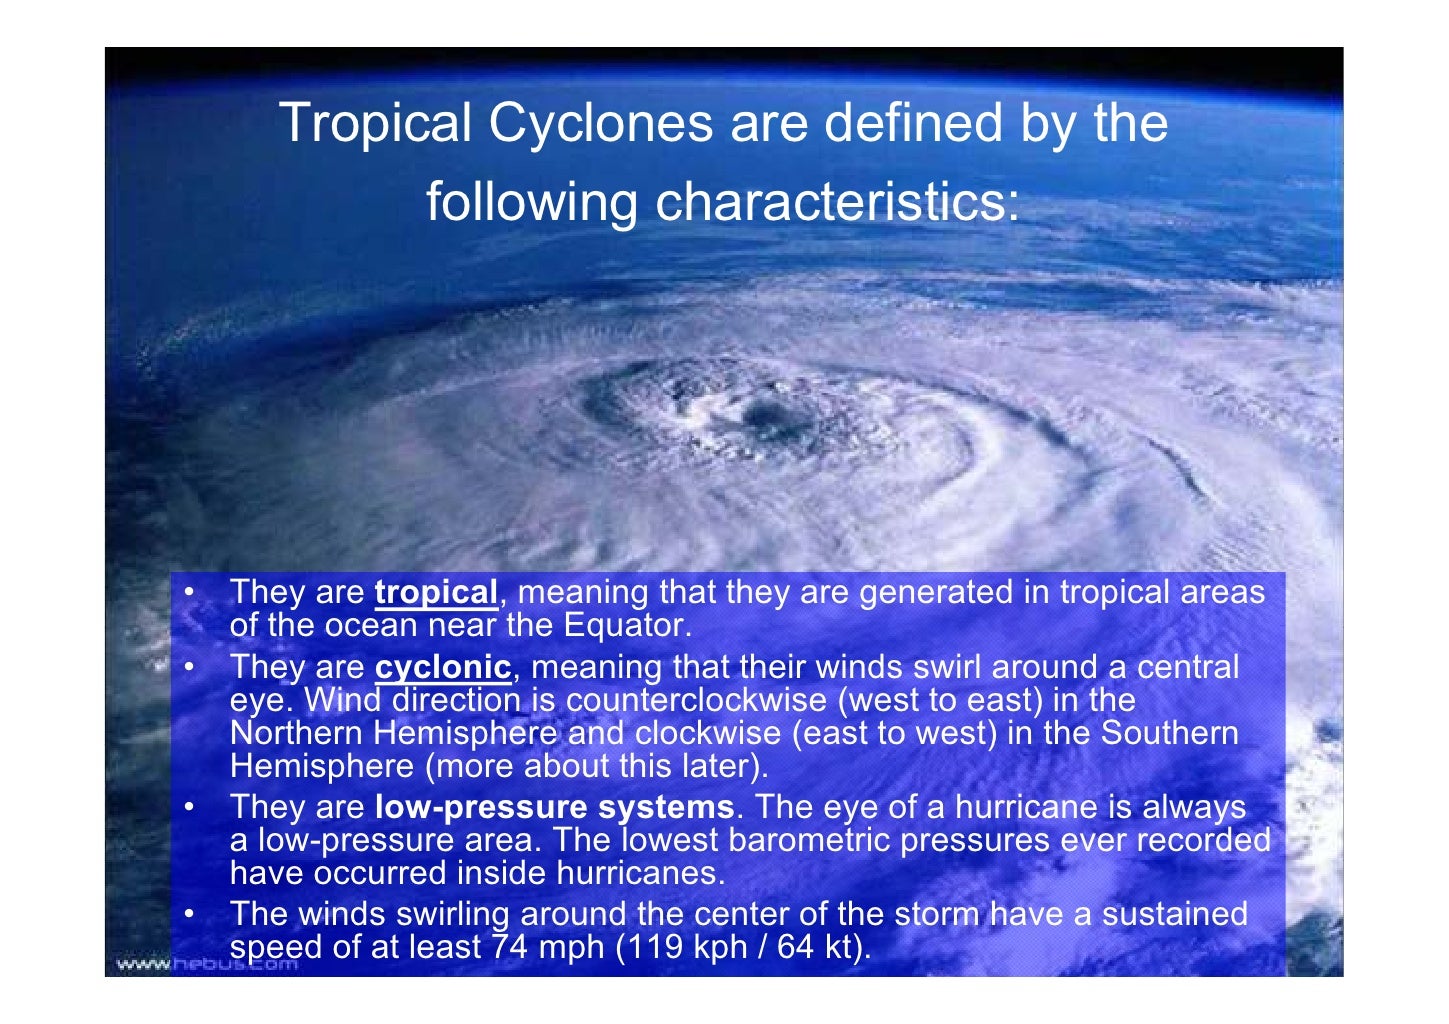 research topic the development and impact of tropical cyclones